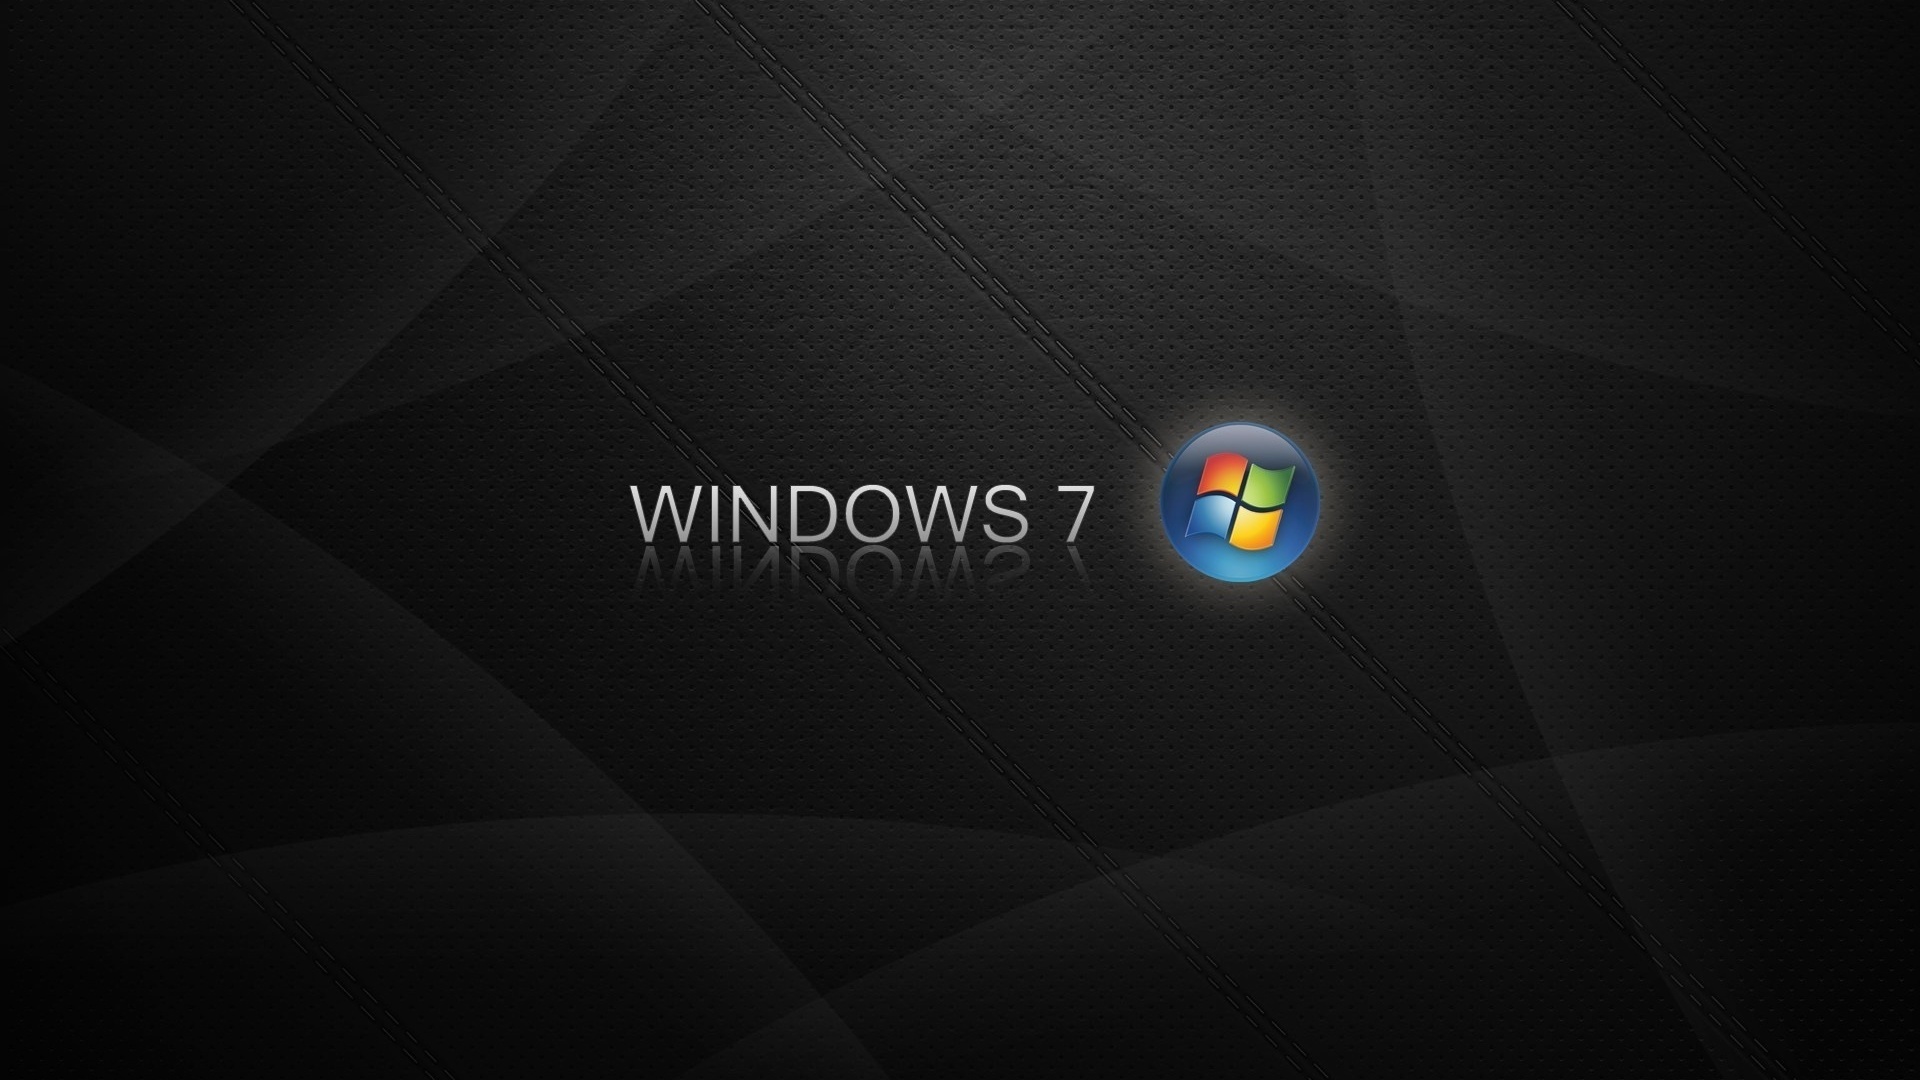 Wallpaper Windows Submited Image